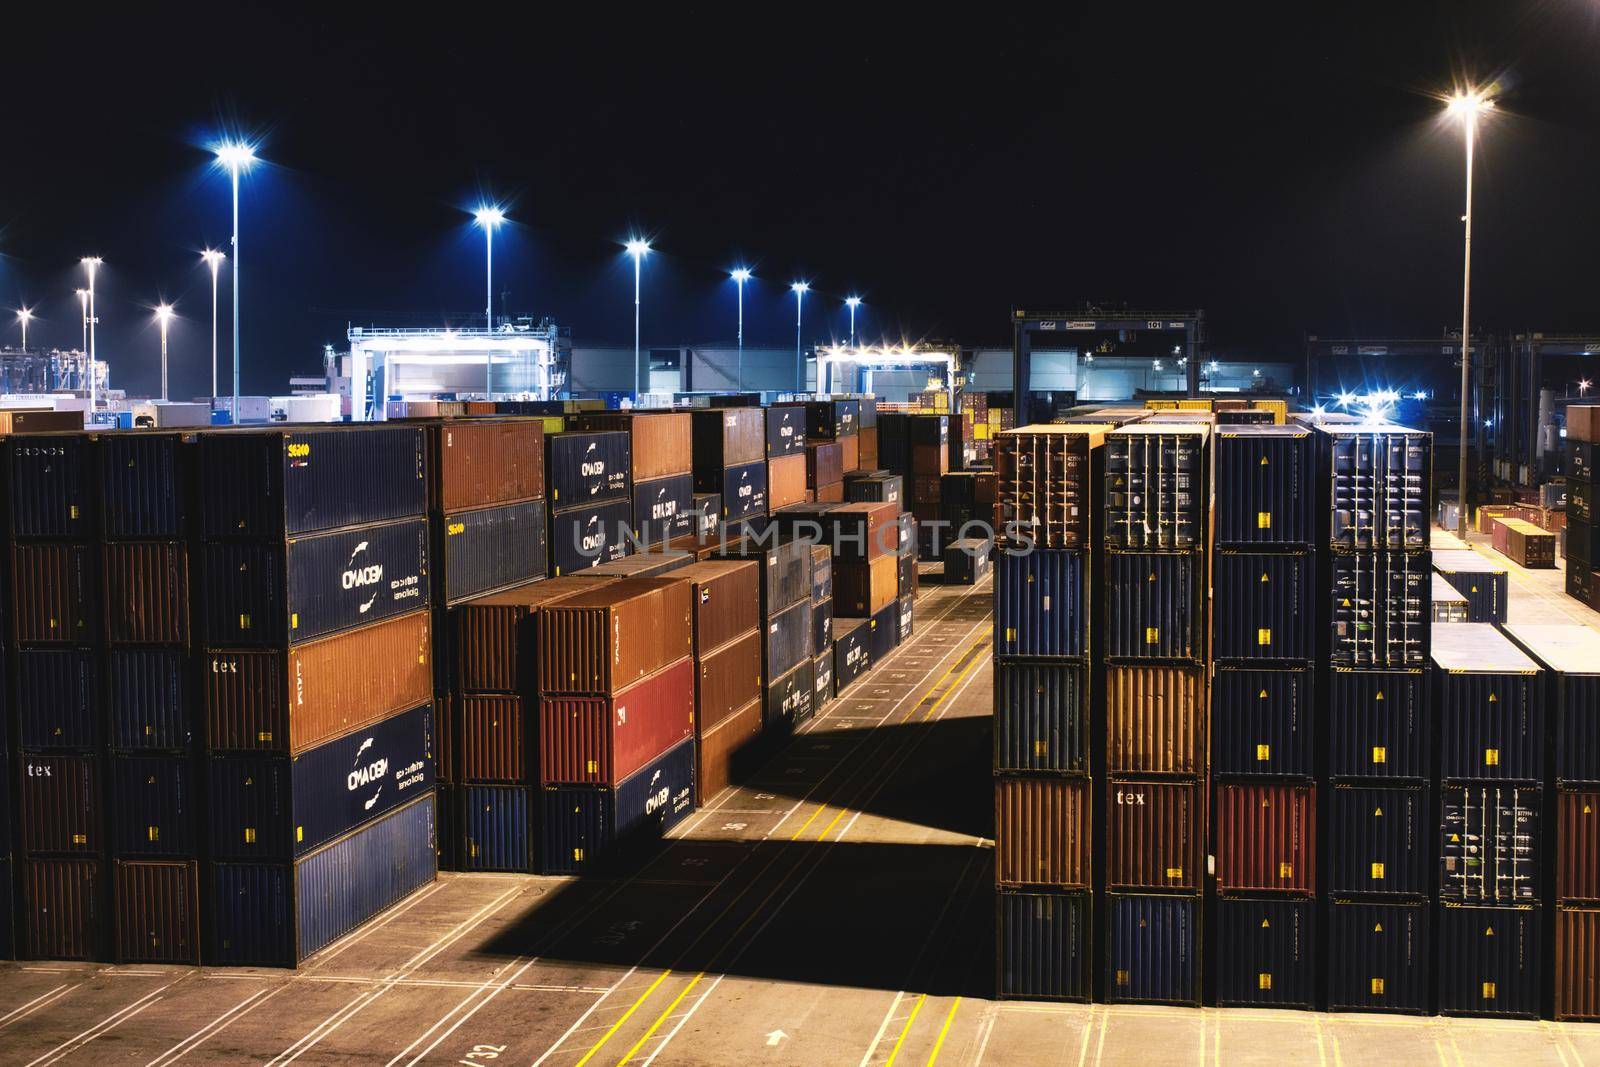 25 April 2022 - Birzebbuga, Malta: Shipping containers containing commercial cargo stacked in a transhipment hub depot at night by tennesseewitney